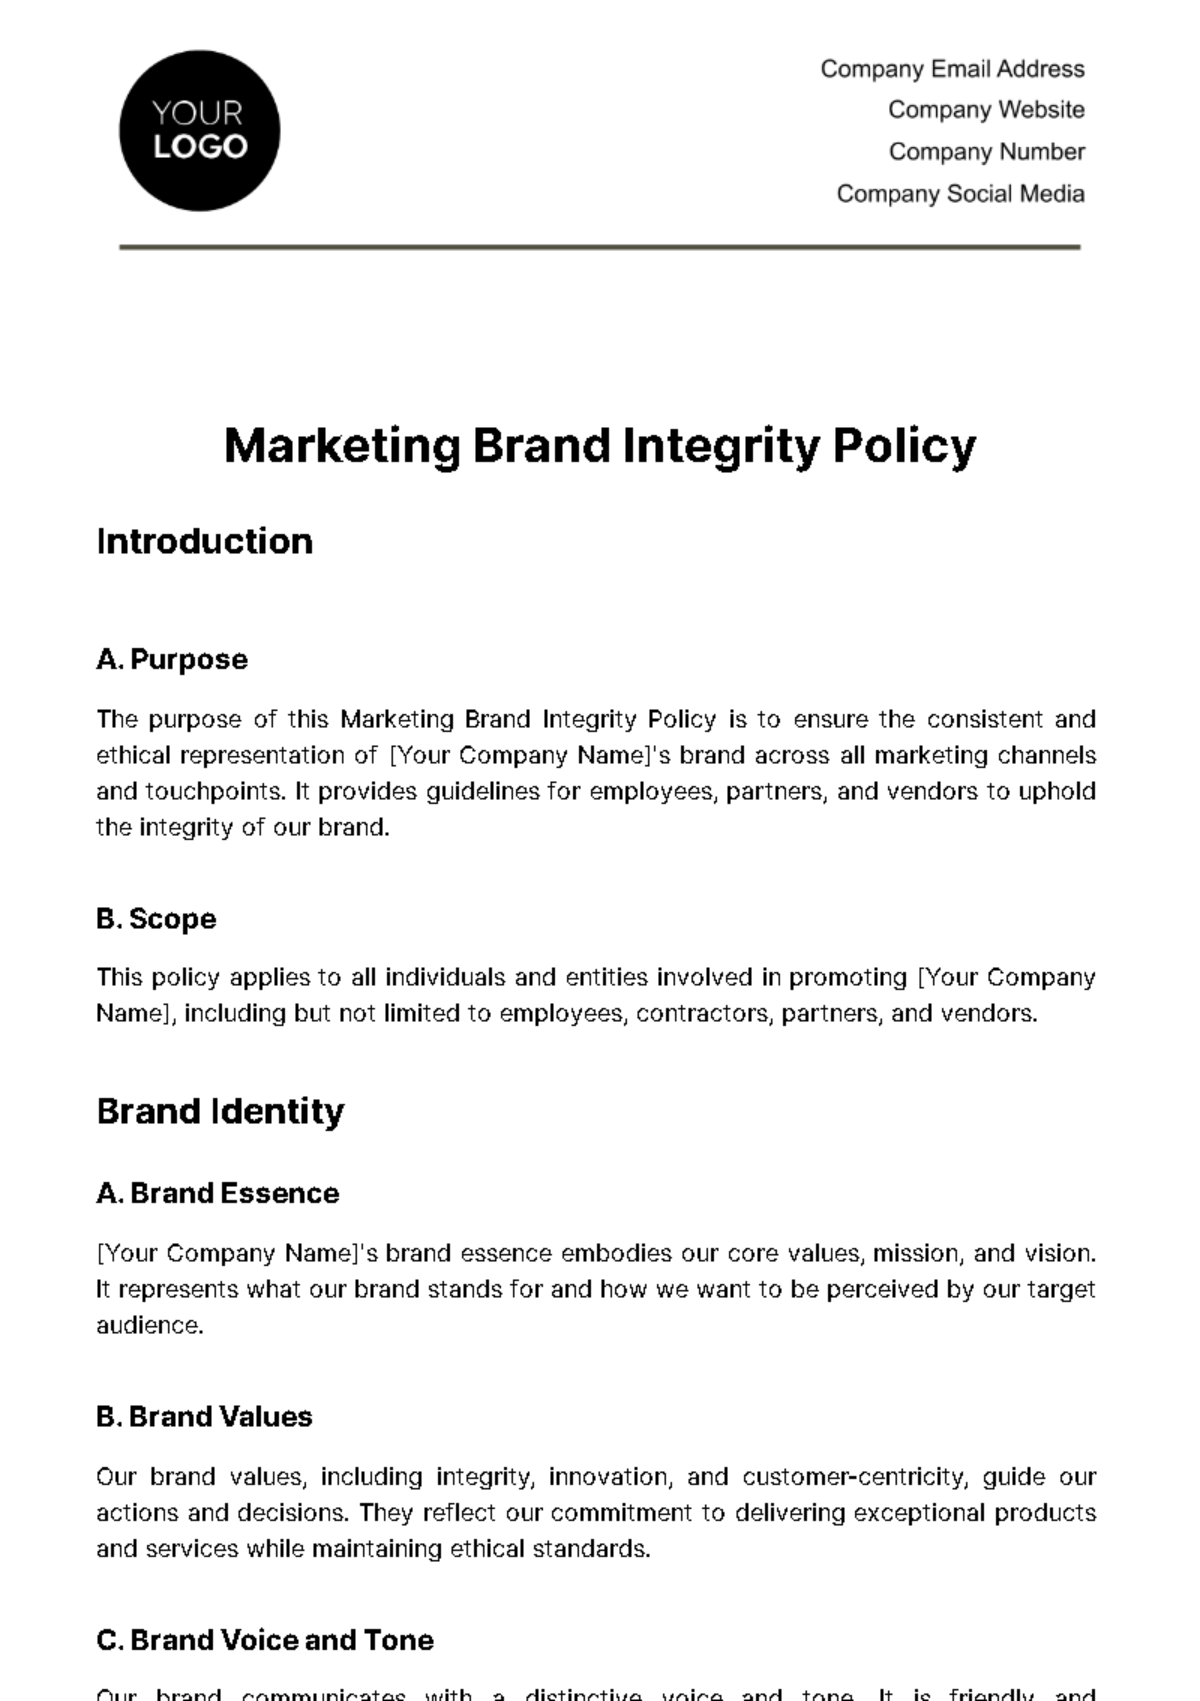 Marketing Brand Integrity Policy Template